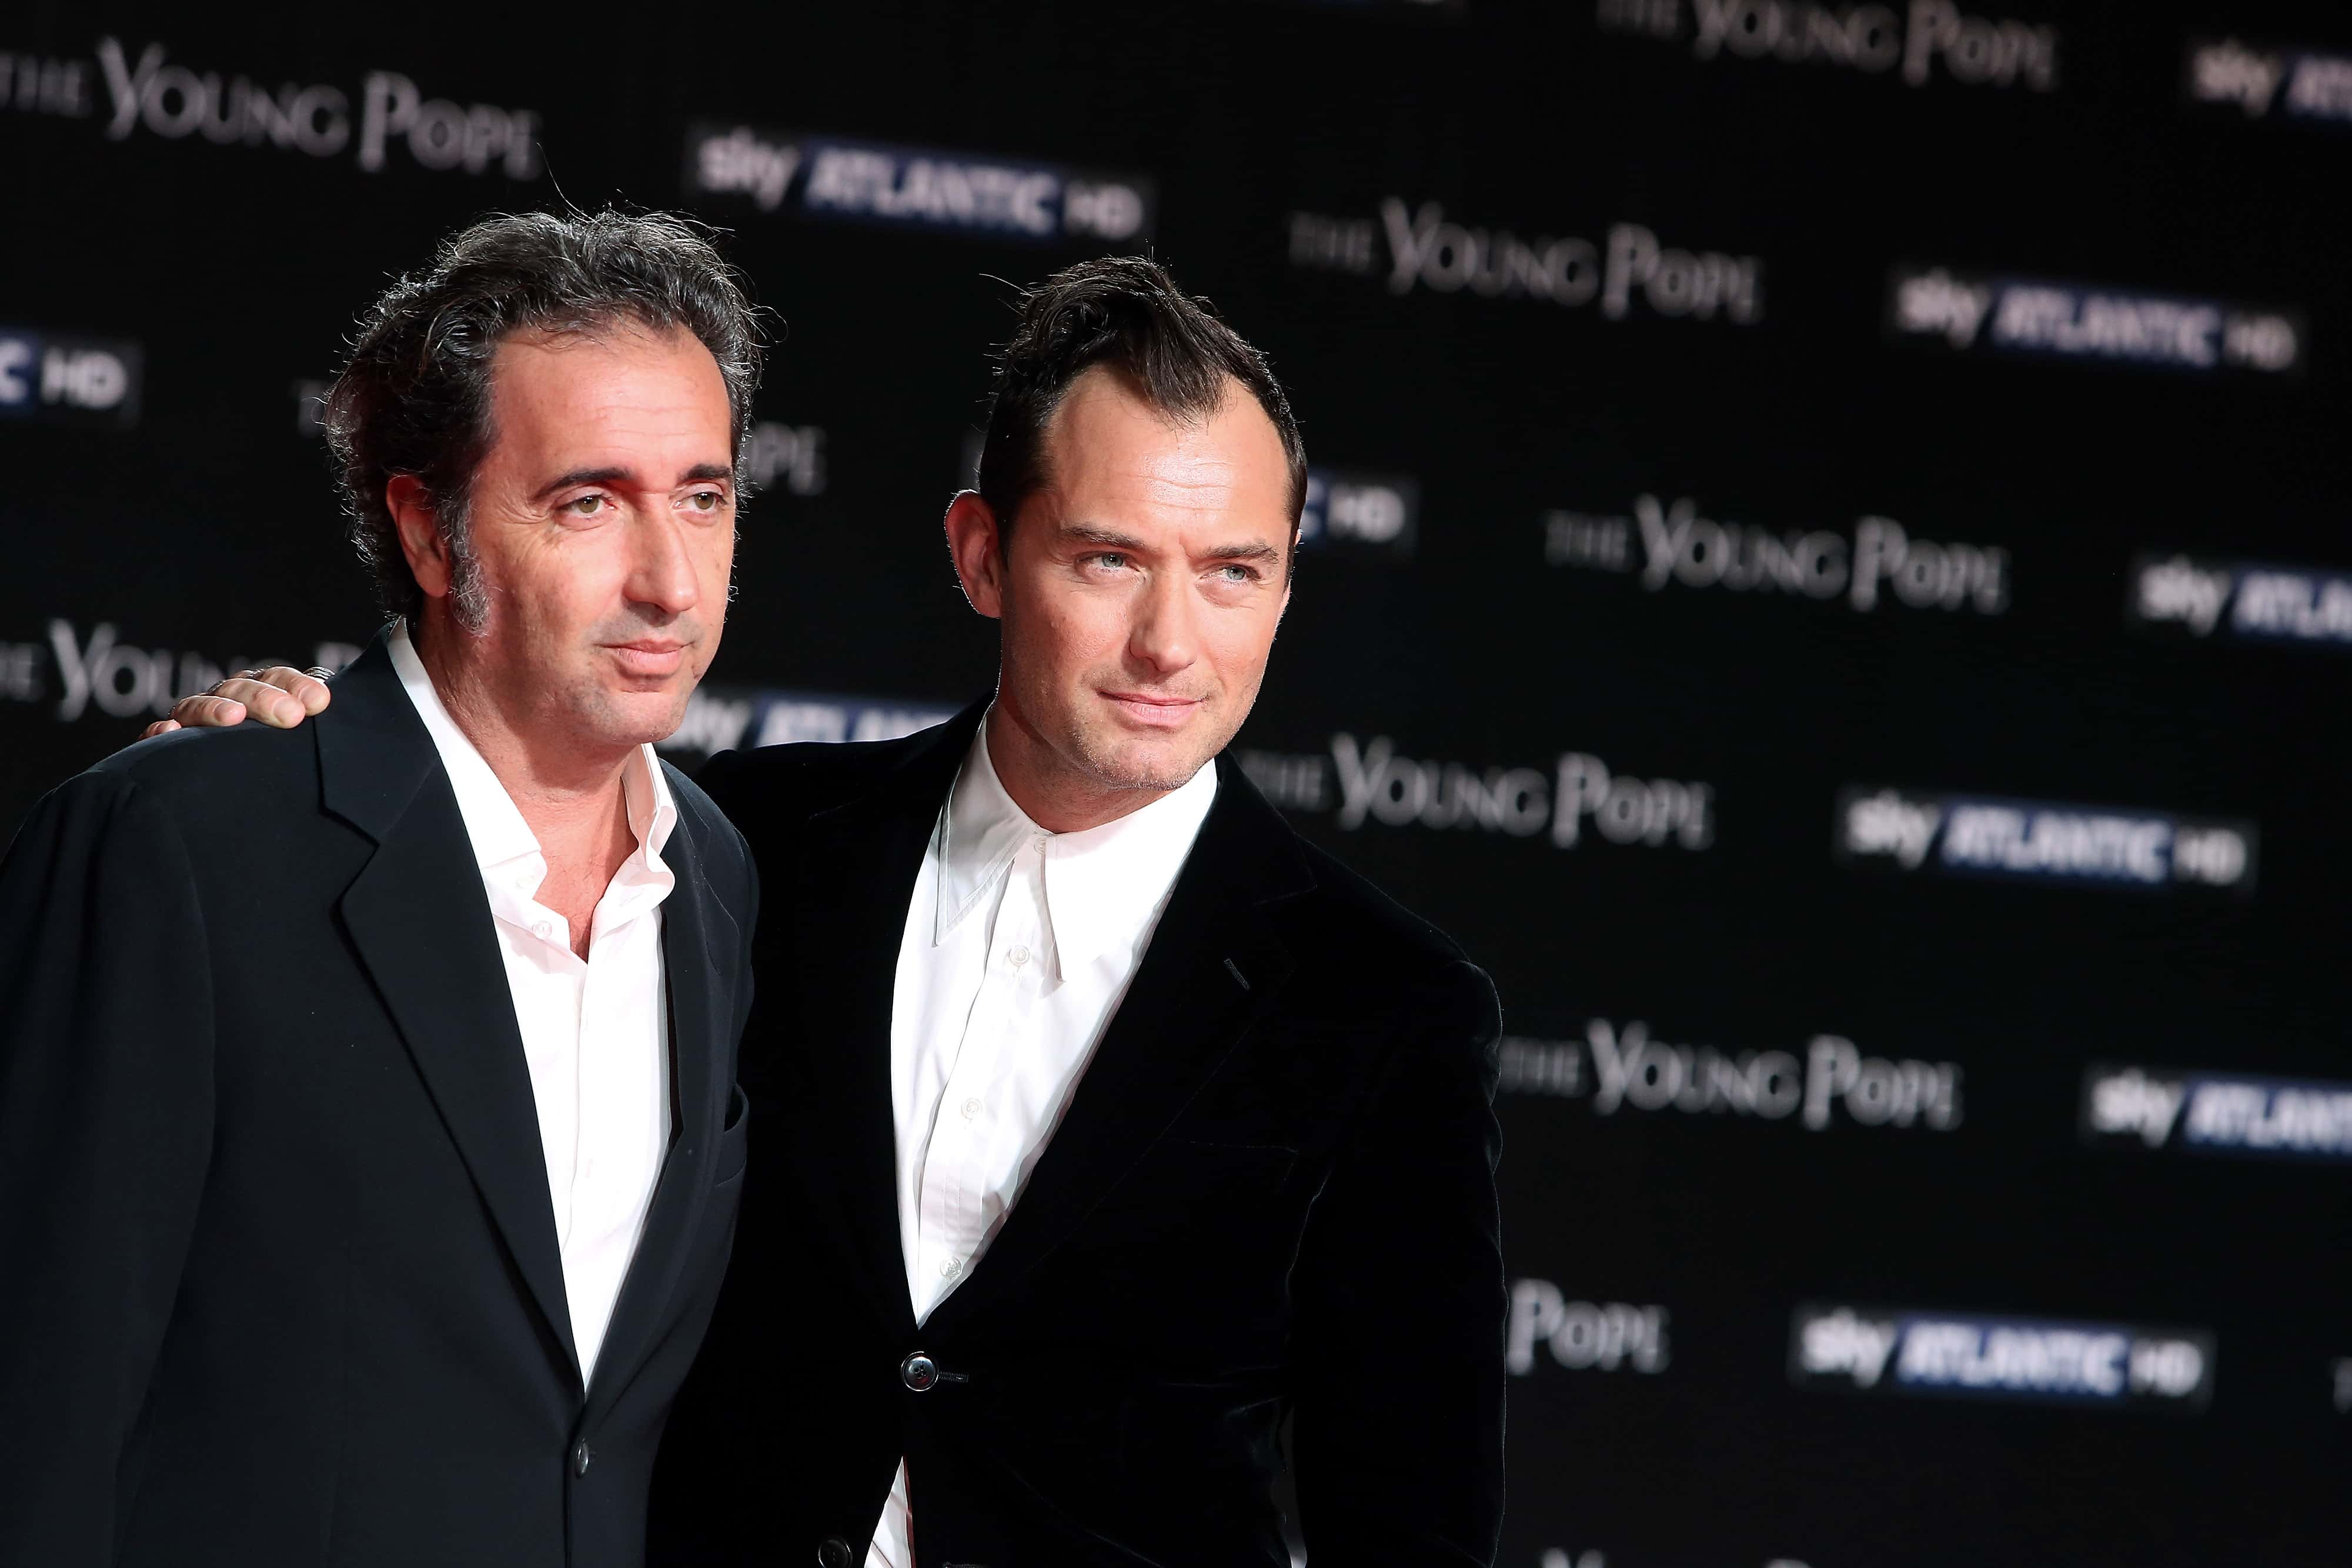 'The Young Pope' Premiere In Rome